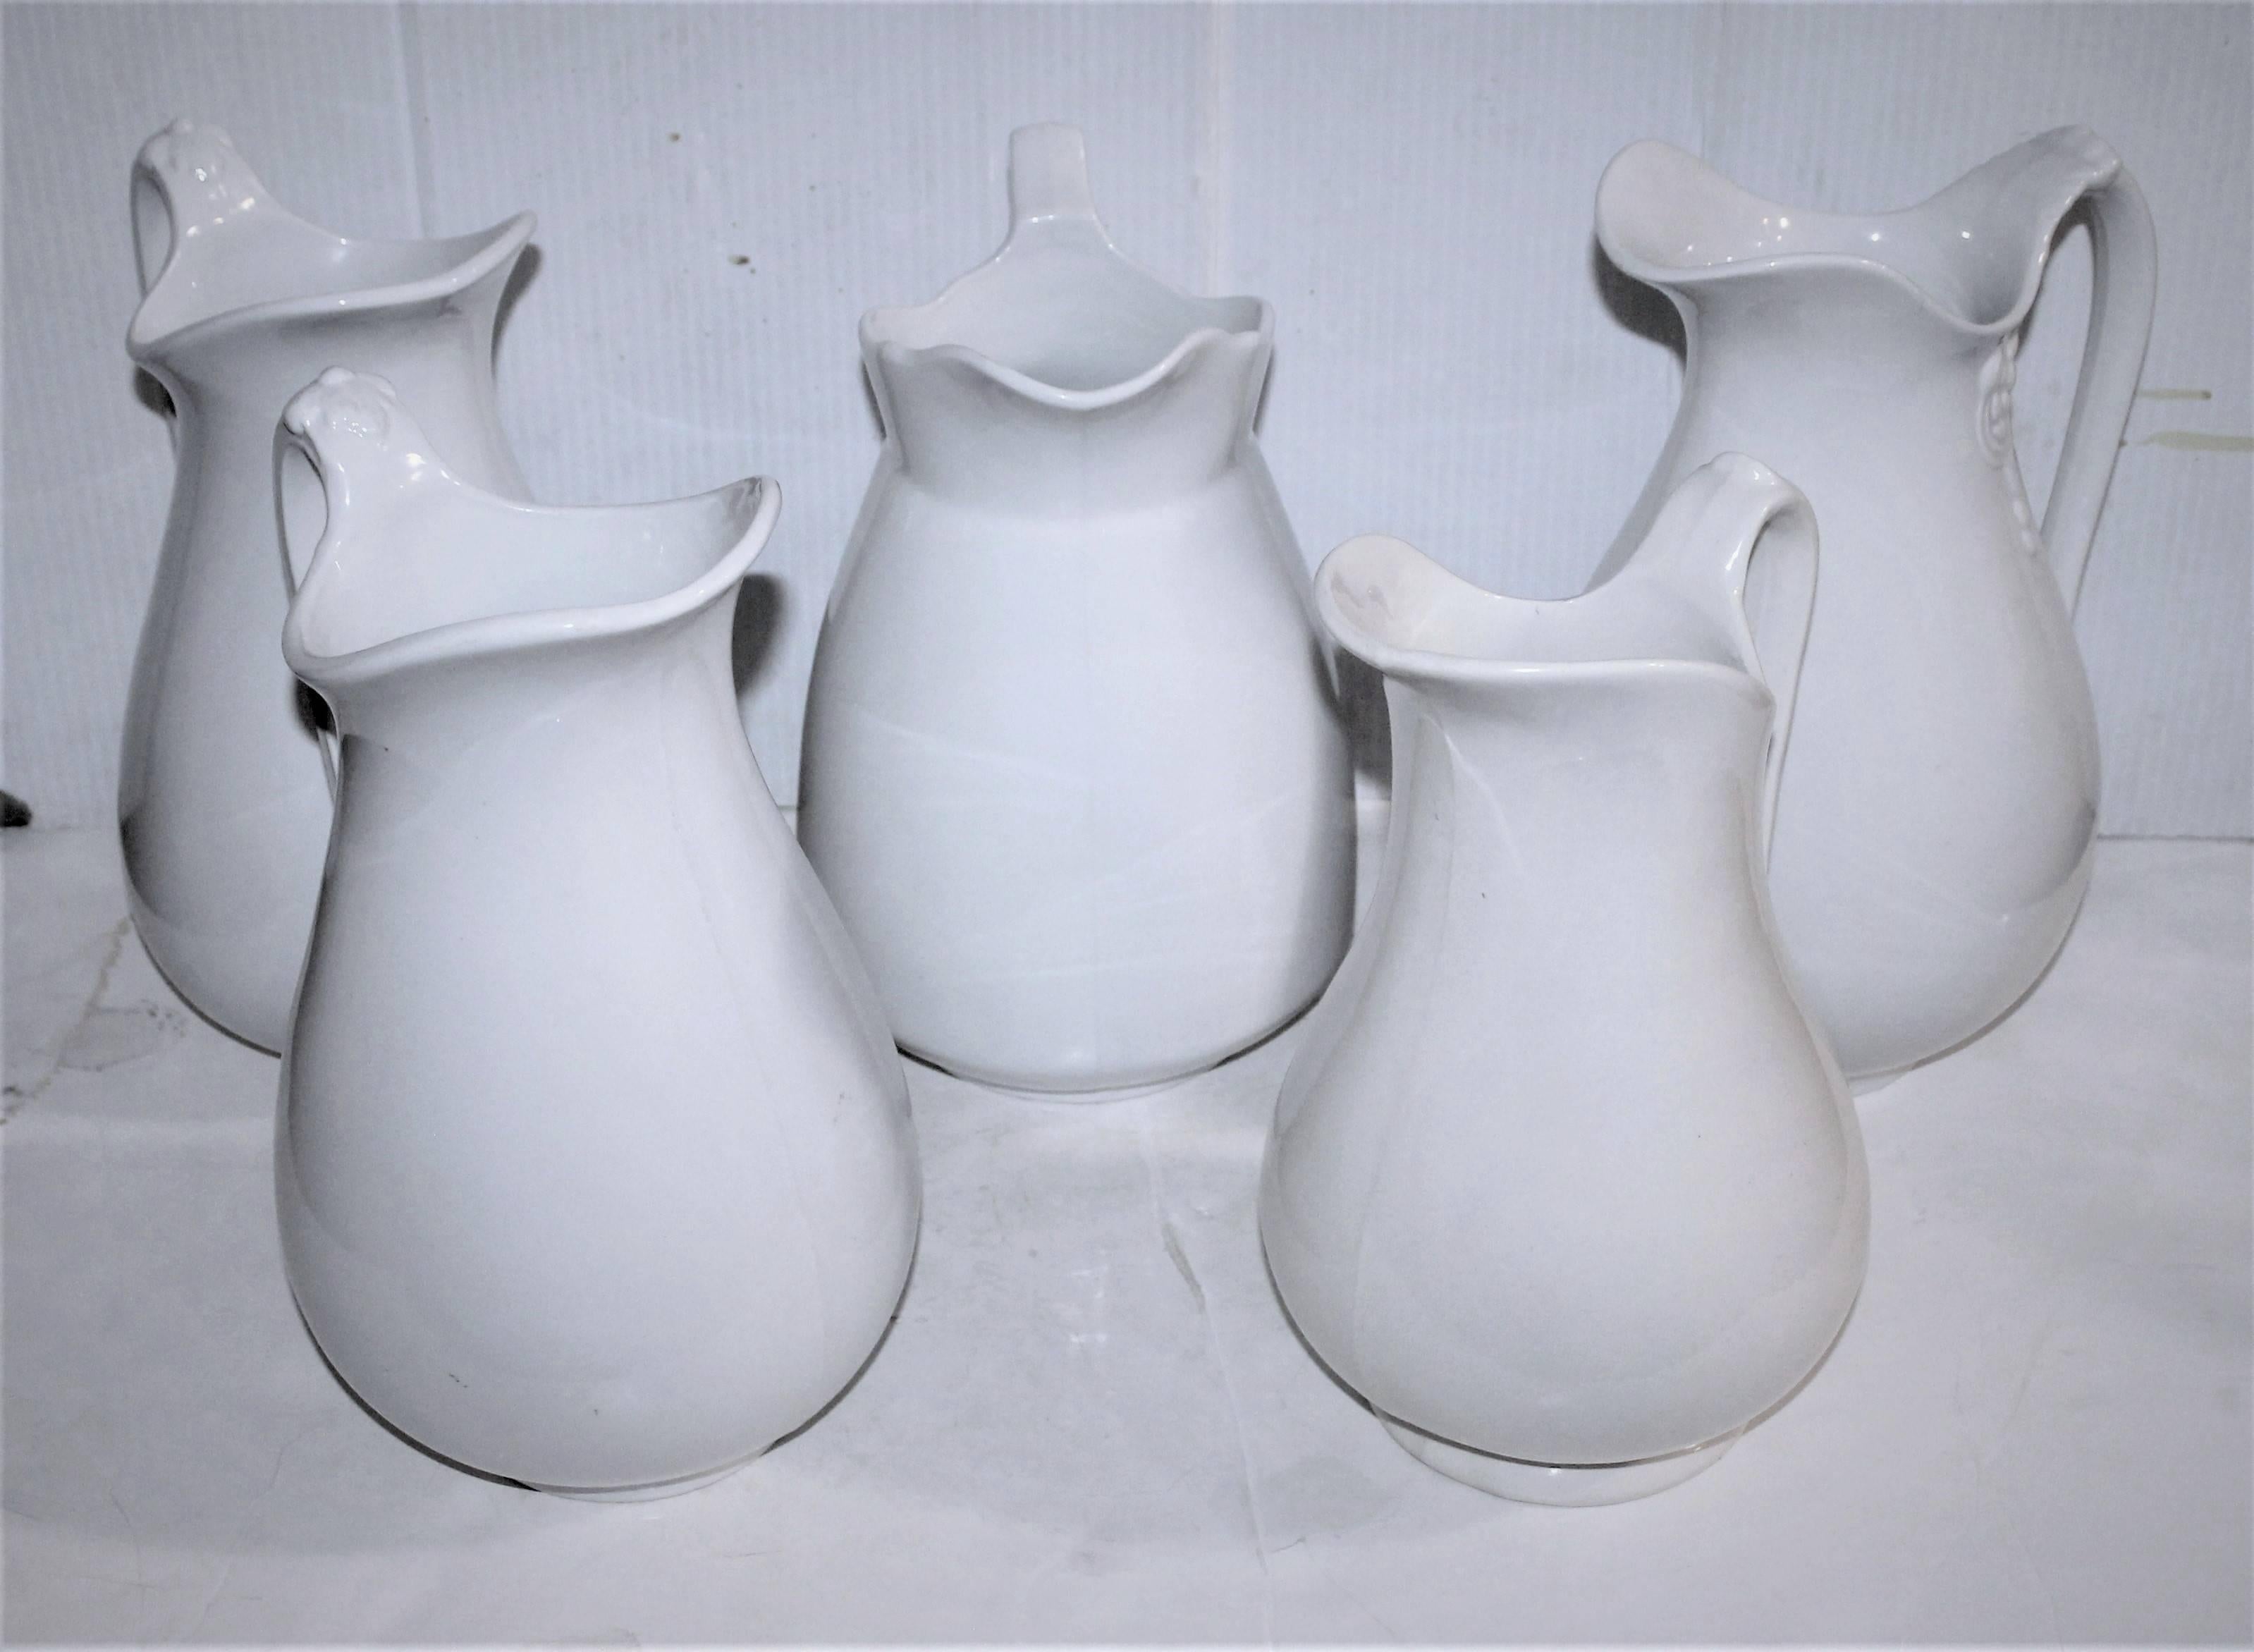 Wonderful collection of five mint condition English ironstone pitchers. Each pitcher is individually marked by the maker. This assorted set of five pitchers have minor wear consistent with age and use.